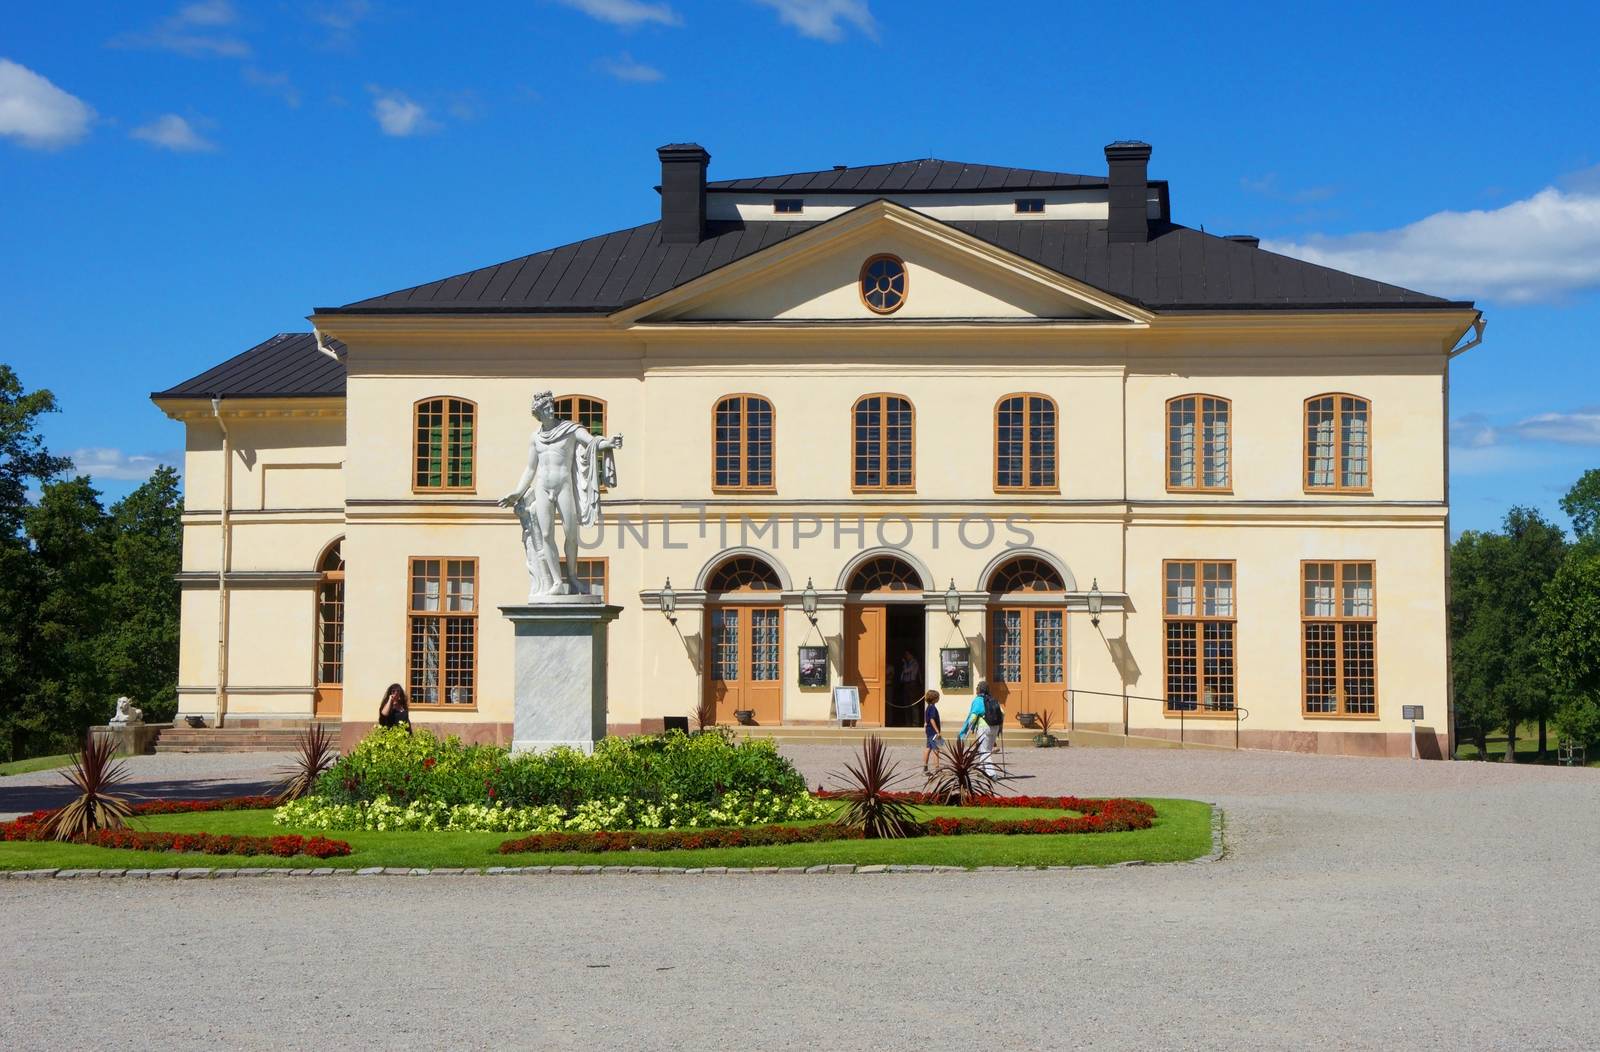 Drottningholm Palace, originally built in the 16th century, is one of Sweden's most popular tourist attractions